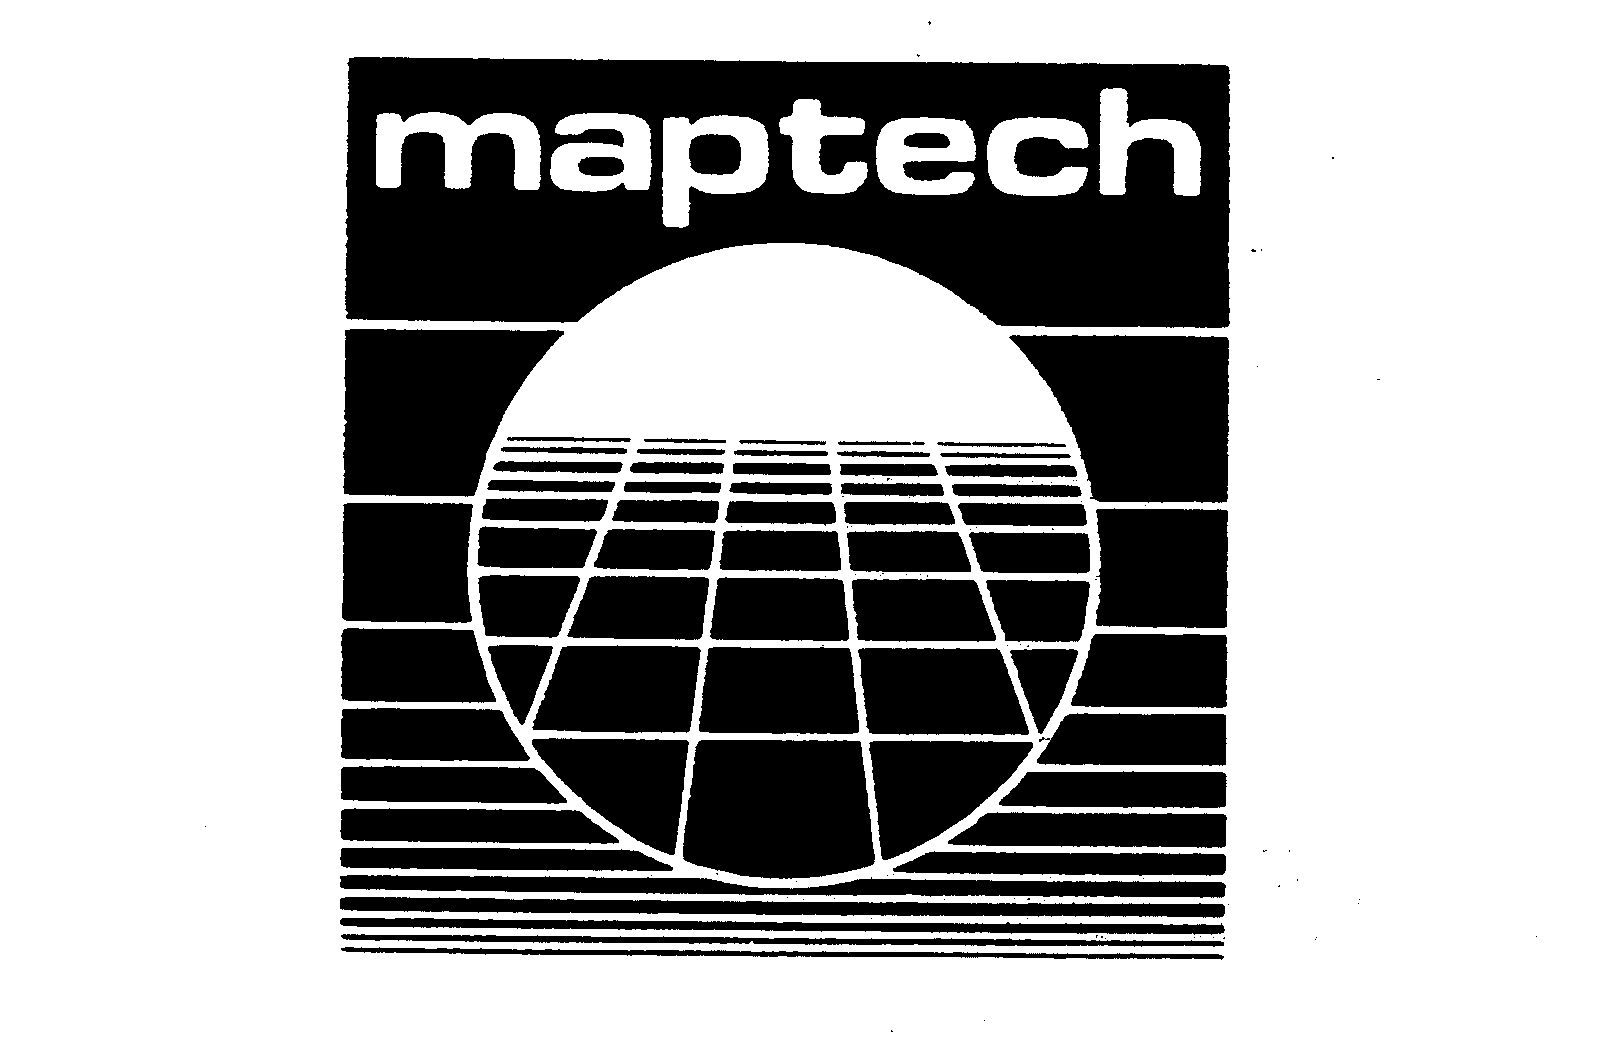  MAPTECH